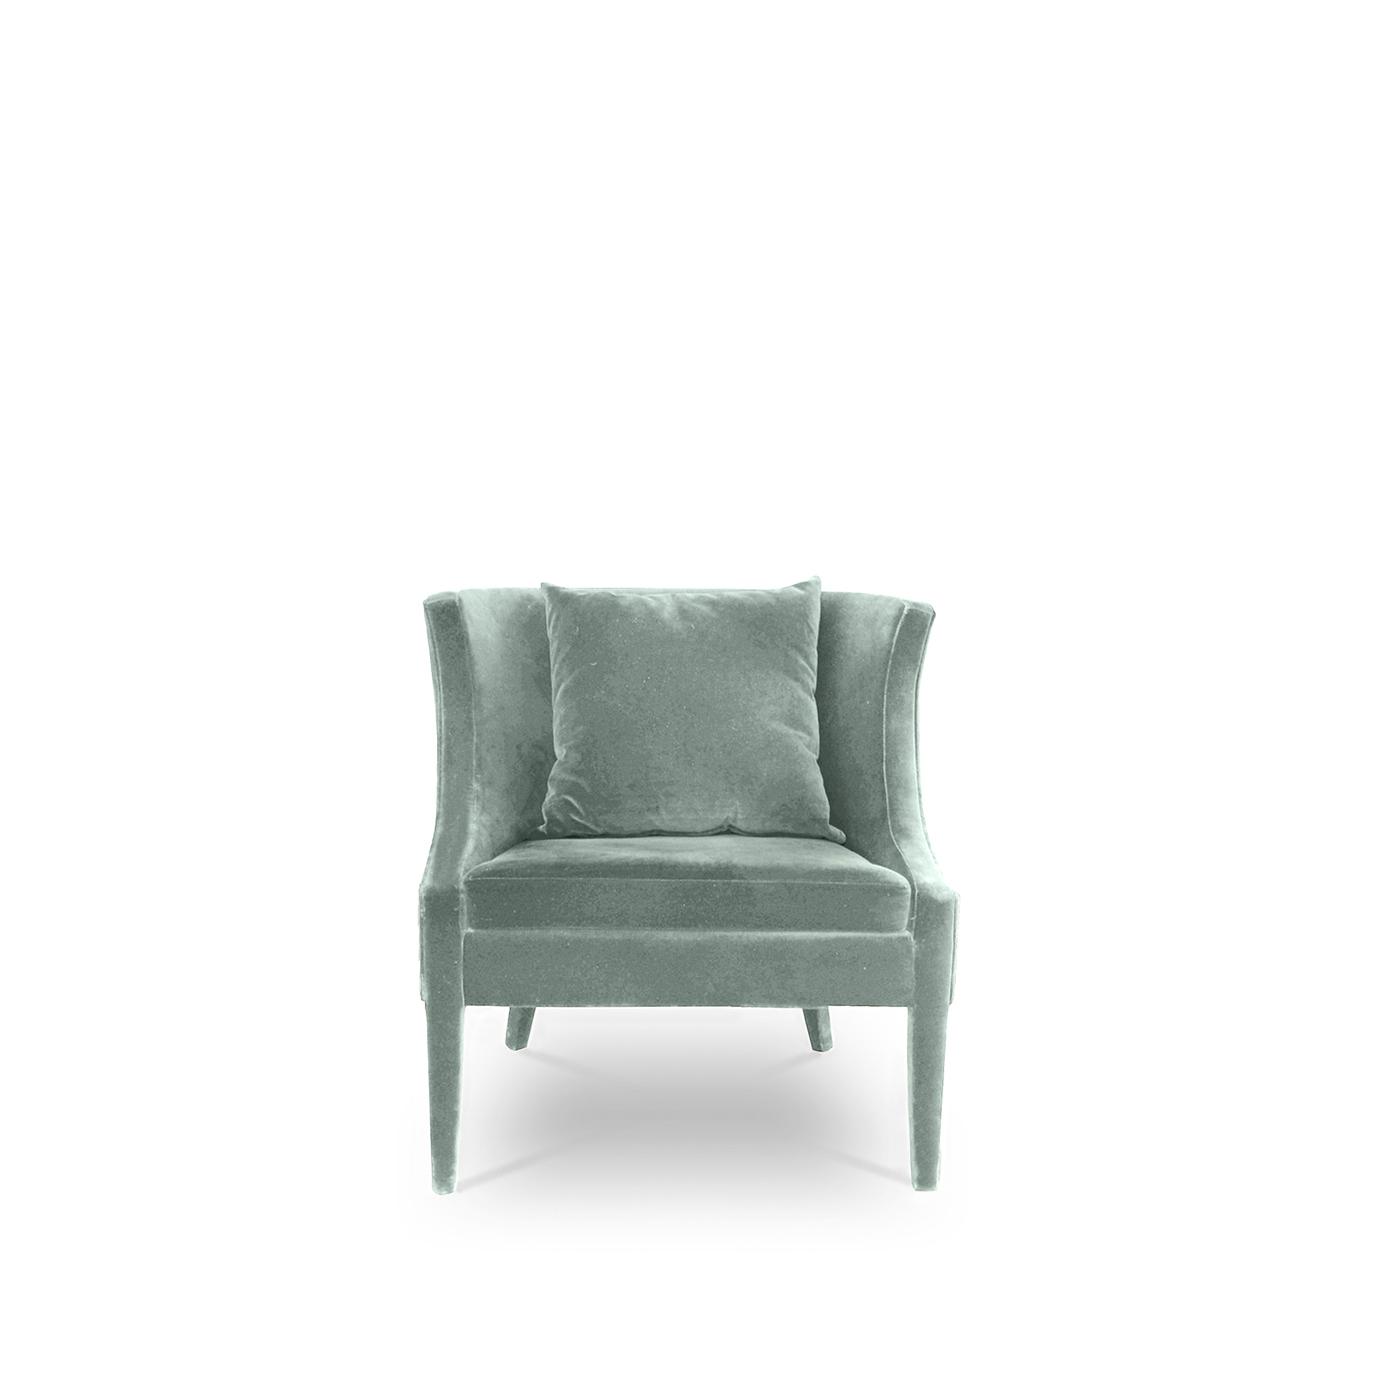 ATHINA CHAIR